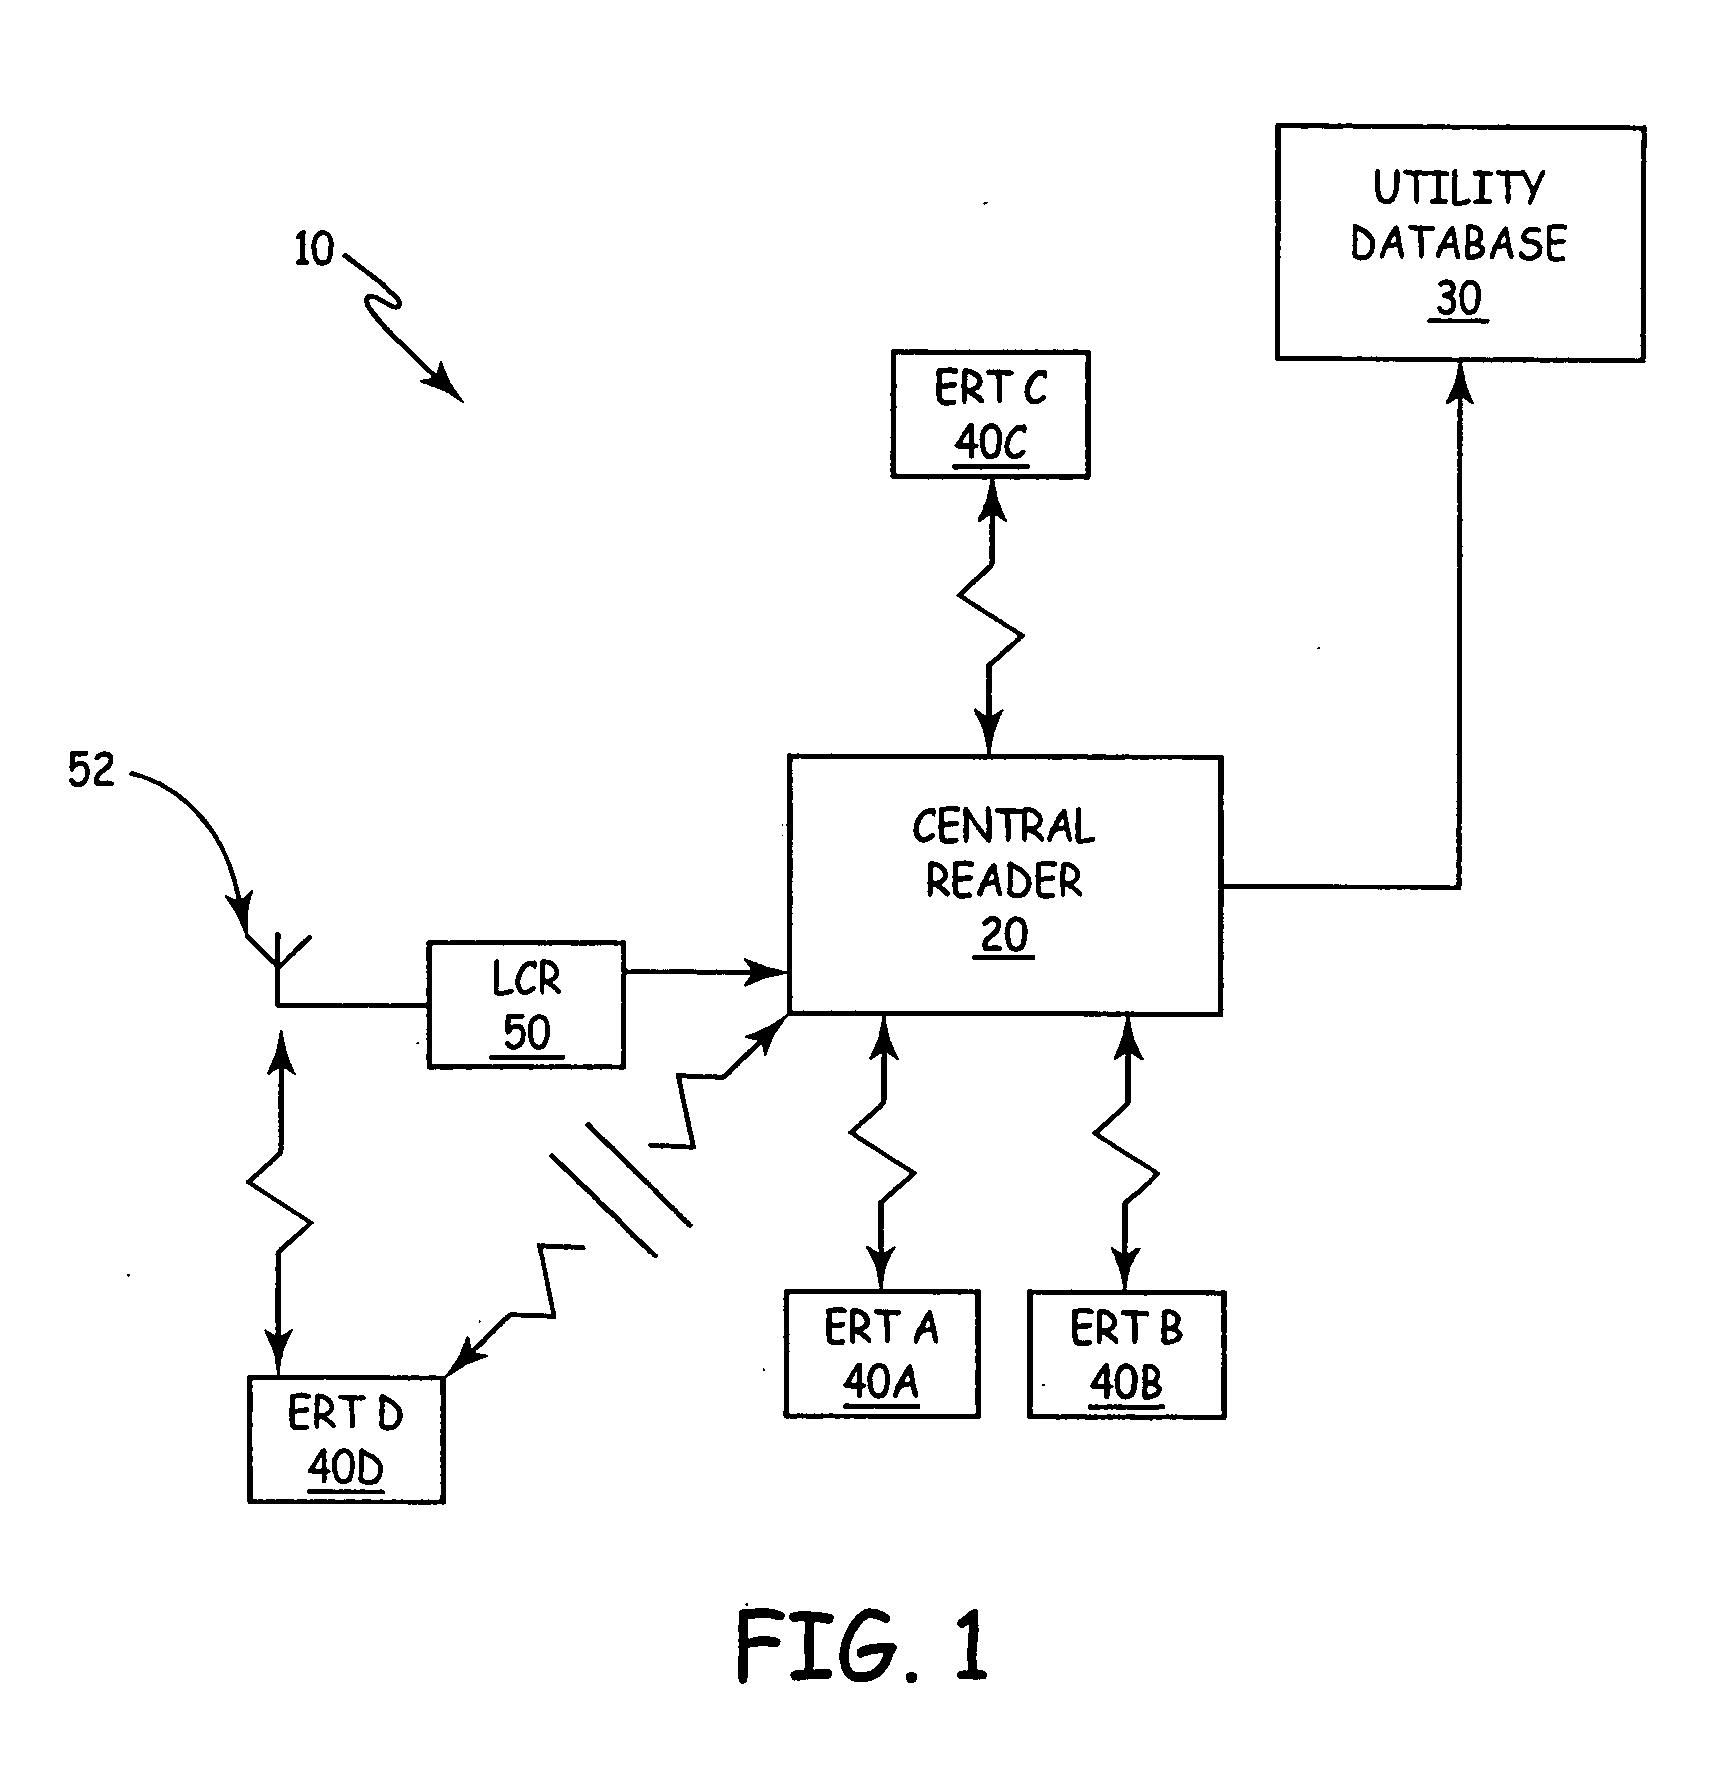 Applications for a low cost receiver in an automatic meter reading system